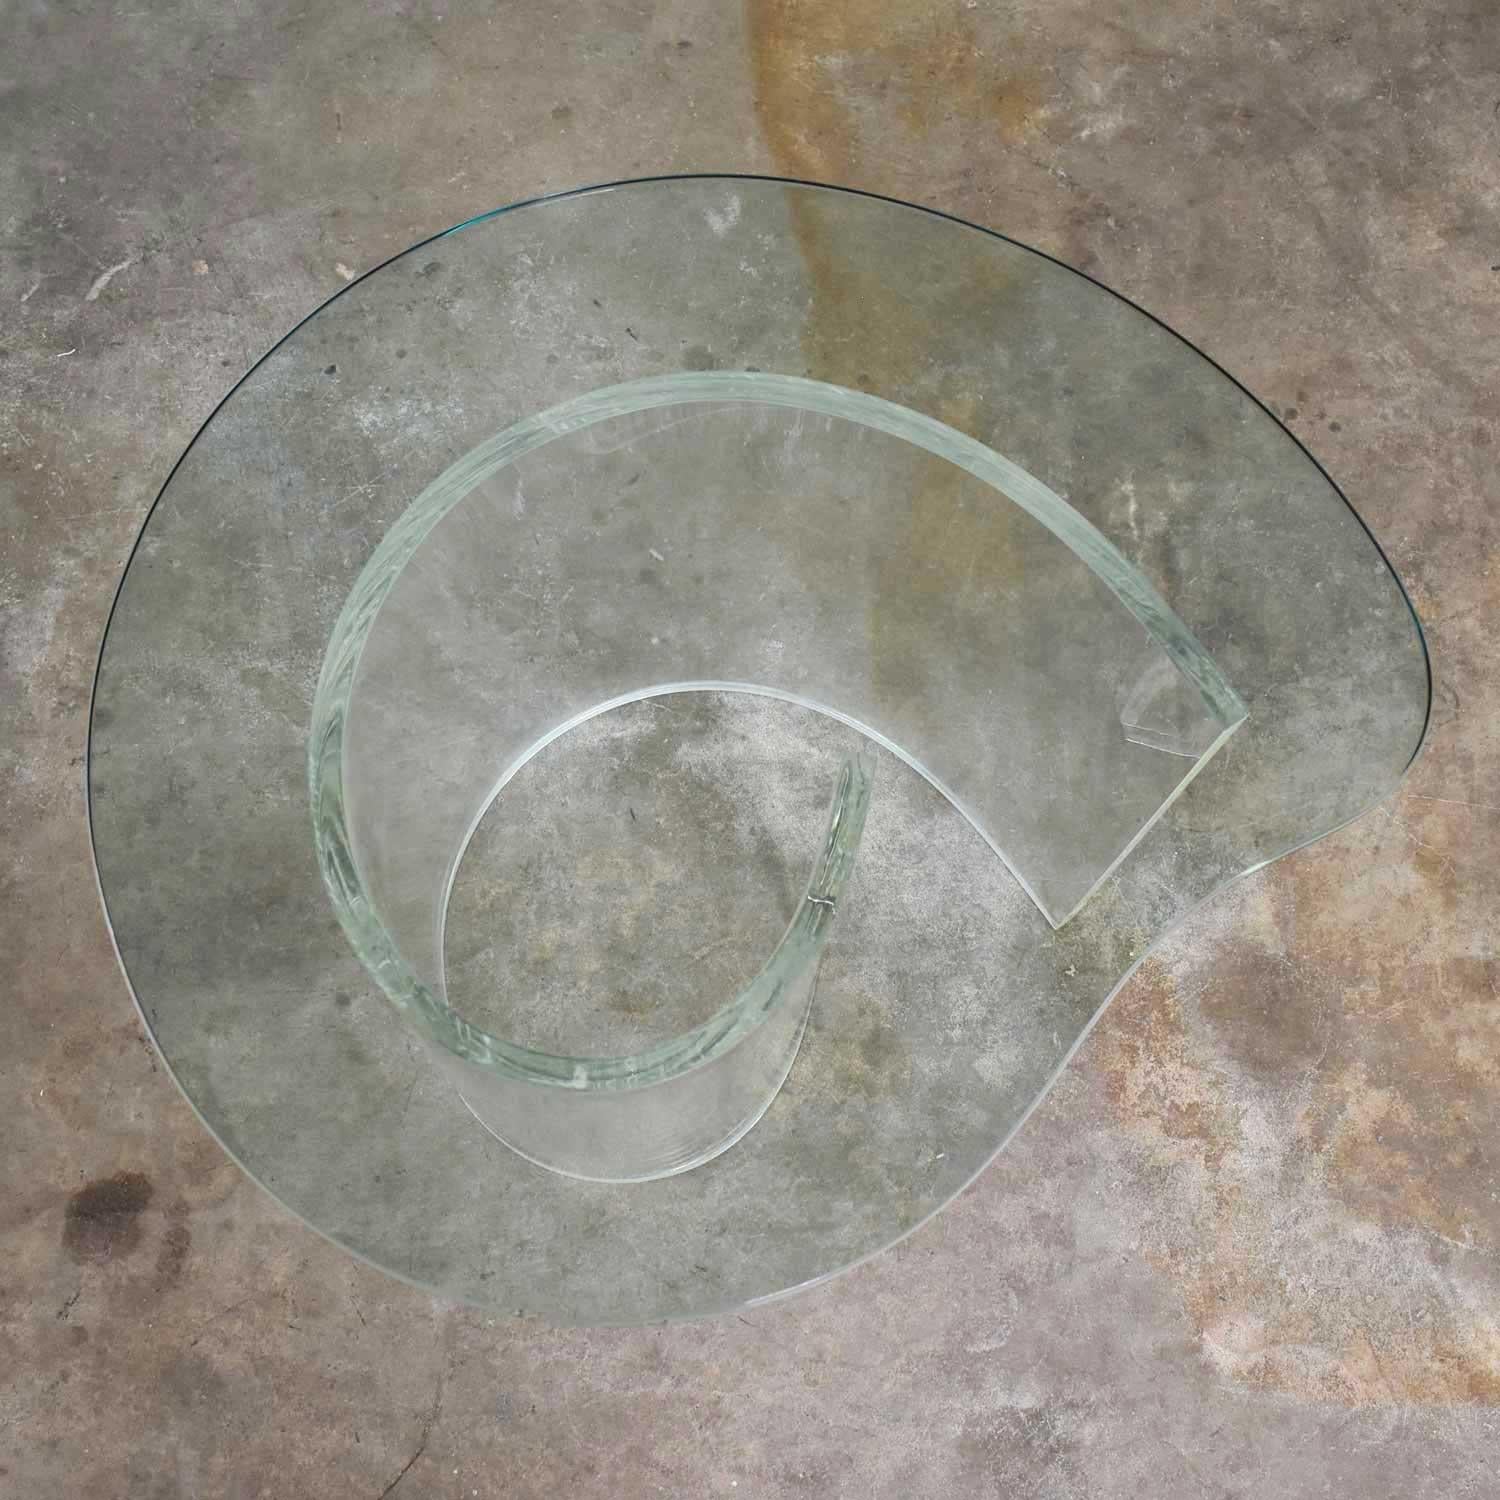 Striking vintage Hollywood Regency Lucite snail or spiral end or side table with a kidney shaped glass top. The Lucite is in wonderful condition clear and with only small minor age appropriate scratches. The fabulous kidney shaped glass